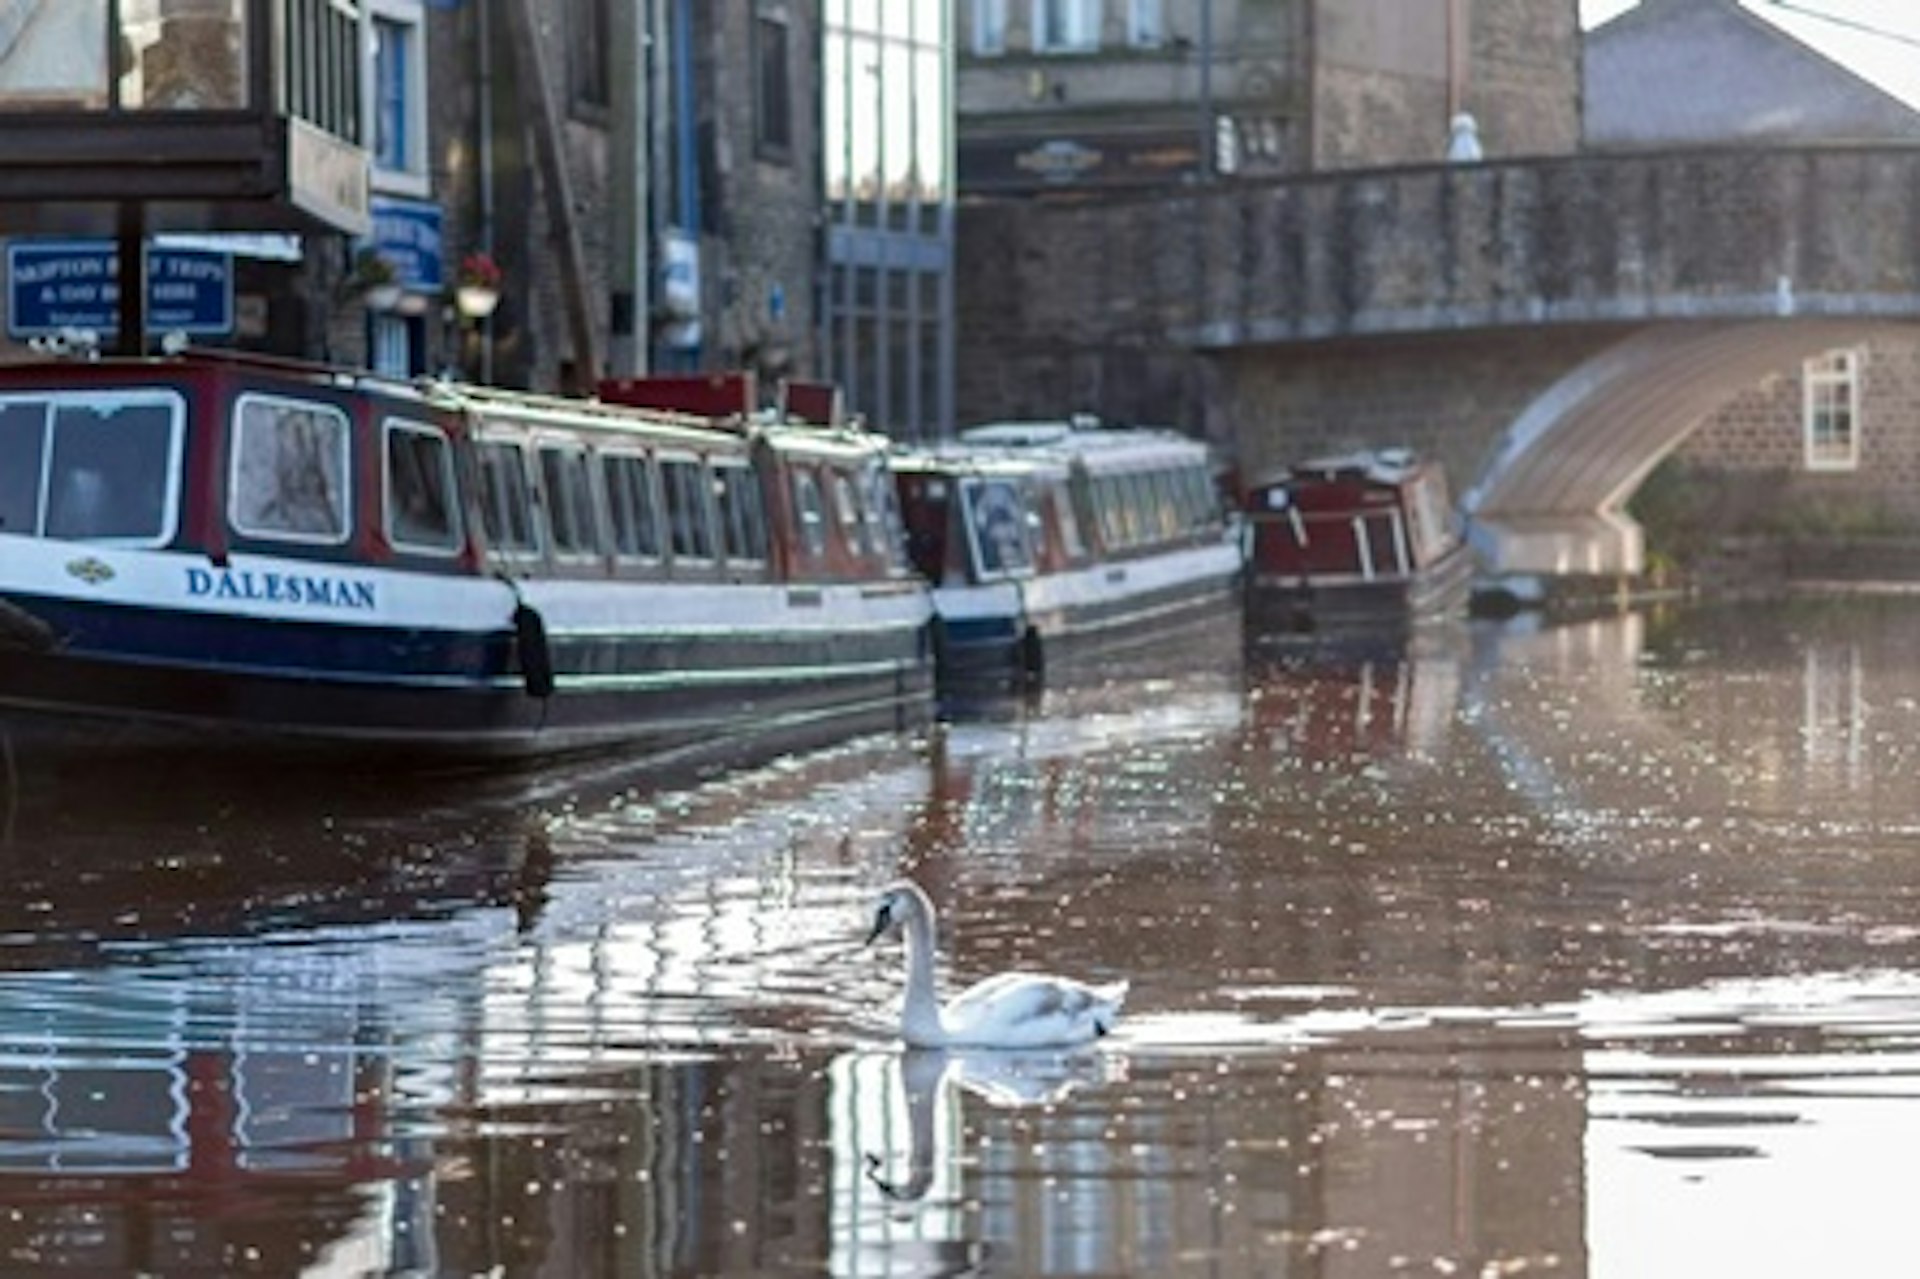 Evening Fish and Chips Cruise on the Leeds & Liverpool Canal for Two 1